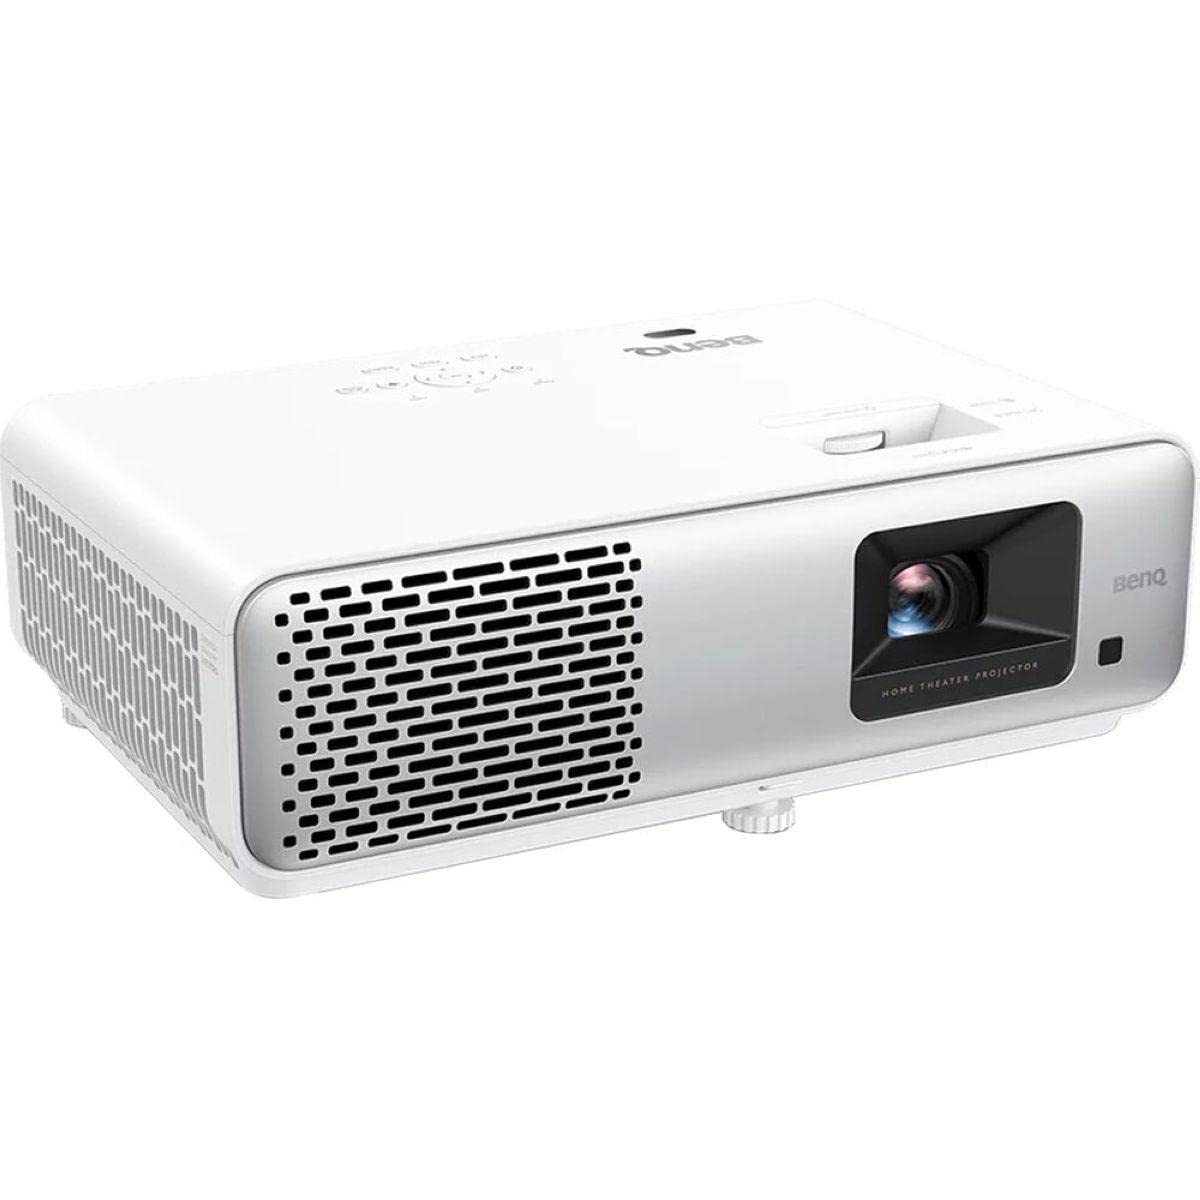 BenQ HT2060 1080p HDR LED Home Theater Projector, DCI-P3 Rec.709 Wide Color Gamut, 8.3ms 120hz, 2D Keystone, 1.3x Zoom, S/PDIF, HDMI, 2 Speakers, 3D, With Flashpoint Projector Tripod Stand